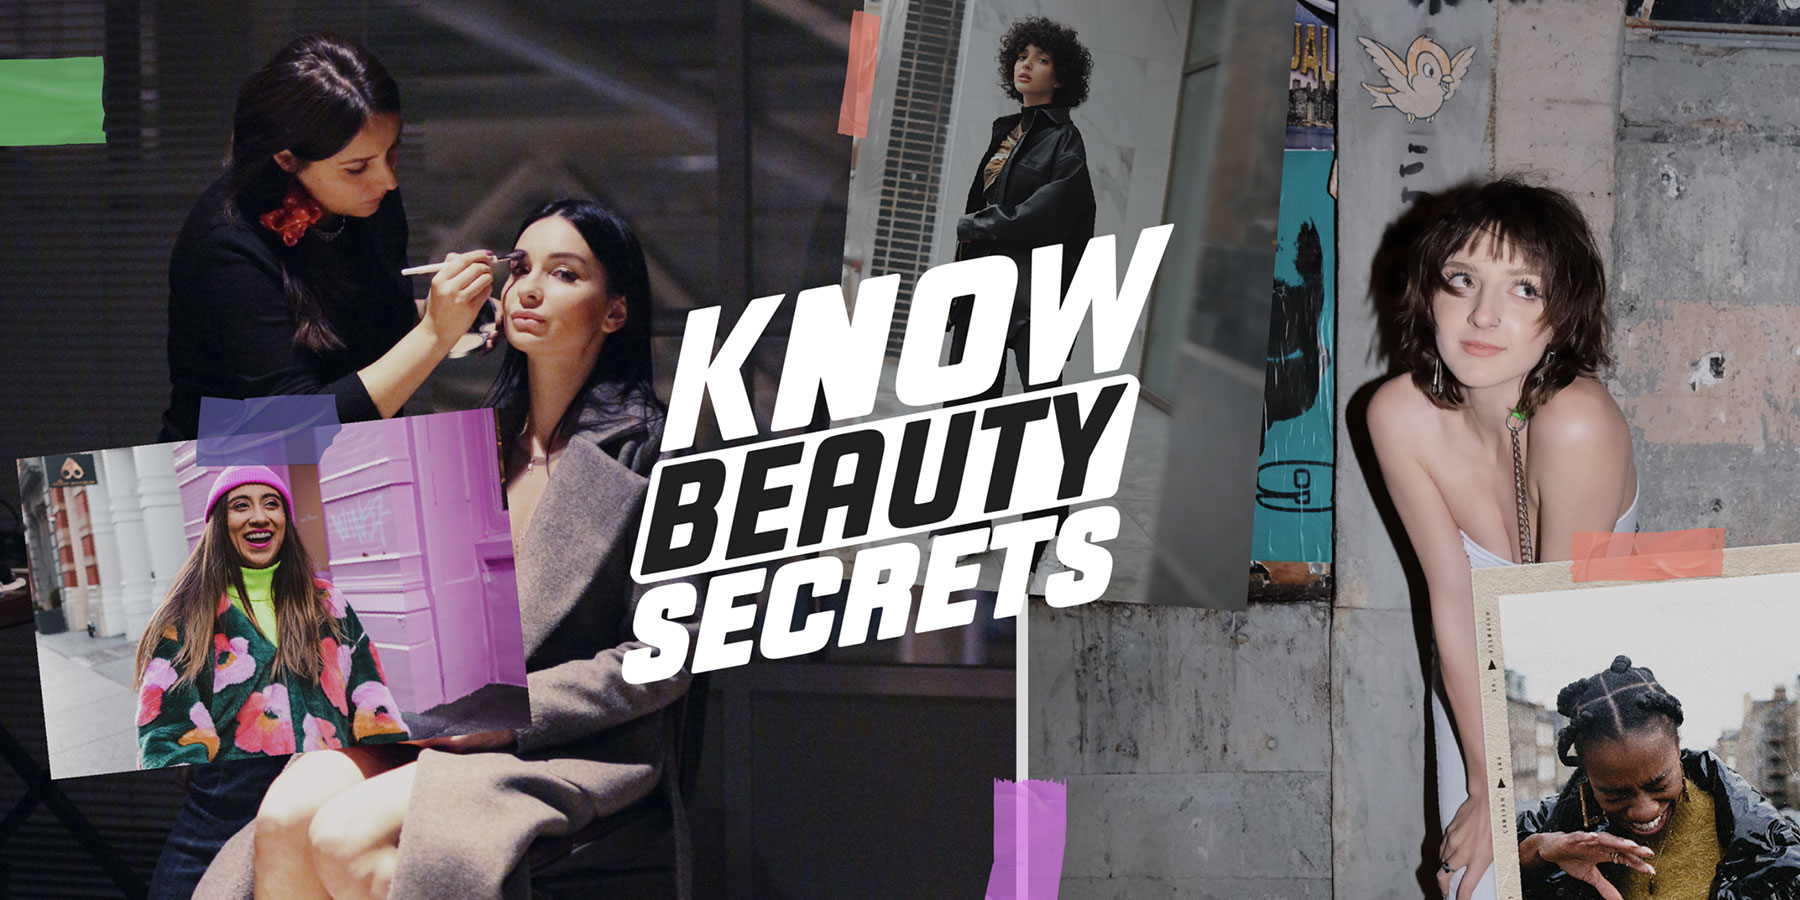 Unite As One Coalition Launches “Know Beauty Secrets” Campaign to Encourage Careers in Beauty